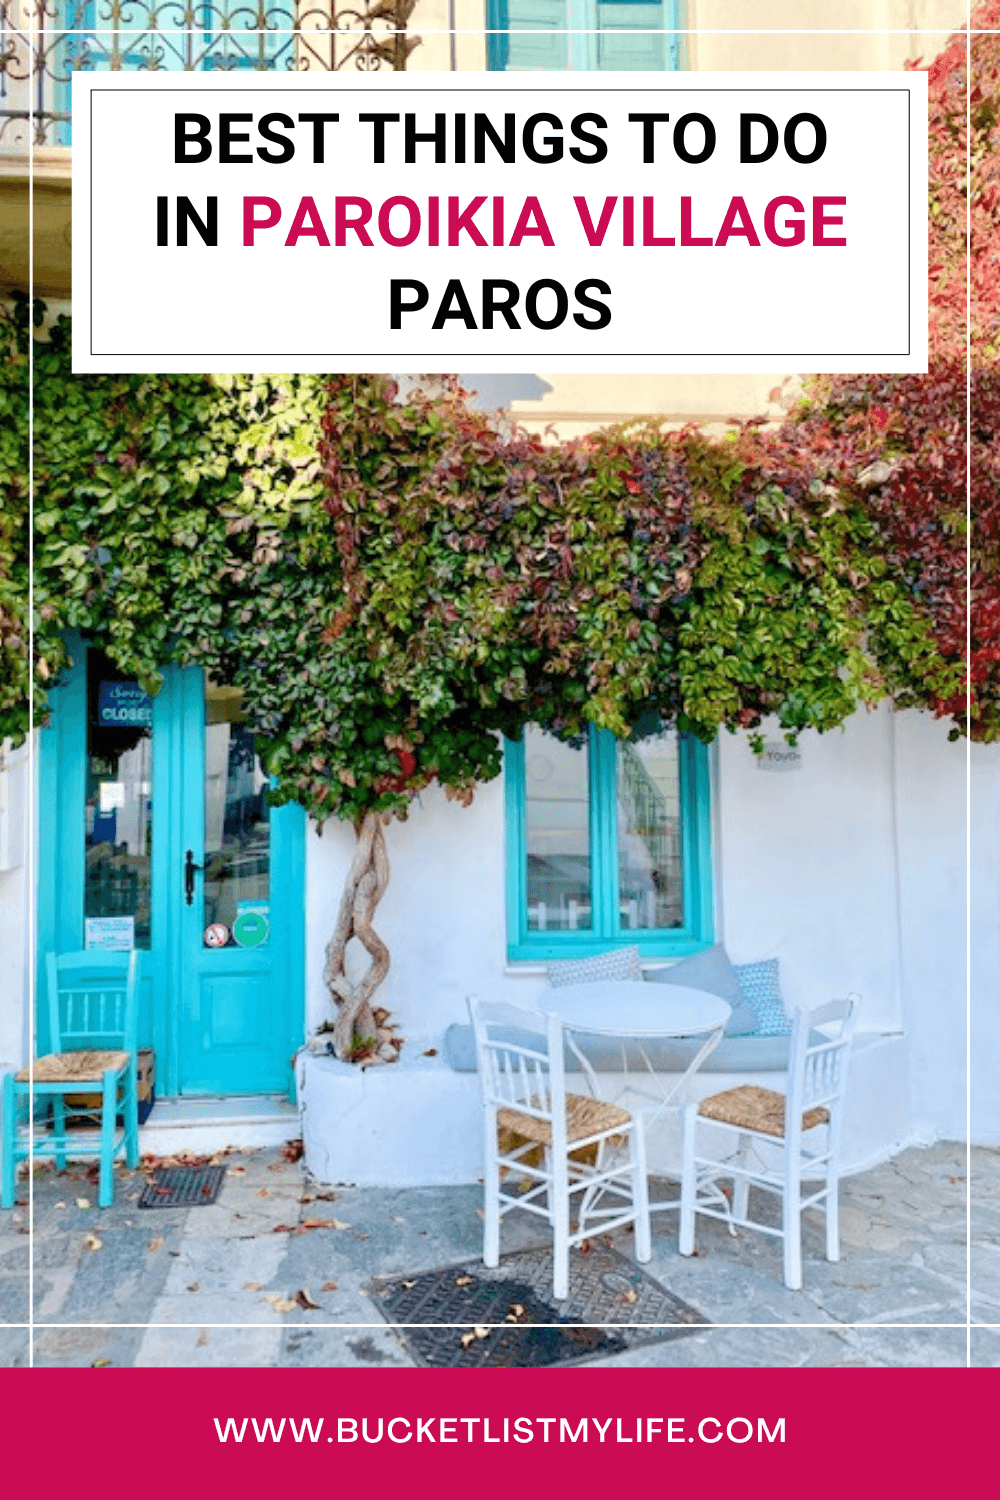 7 Great Things to See and Do in Paroikia, Paros